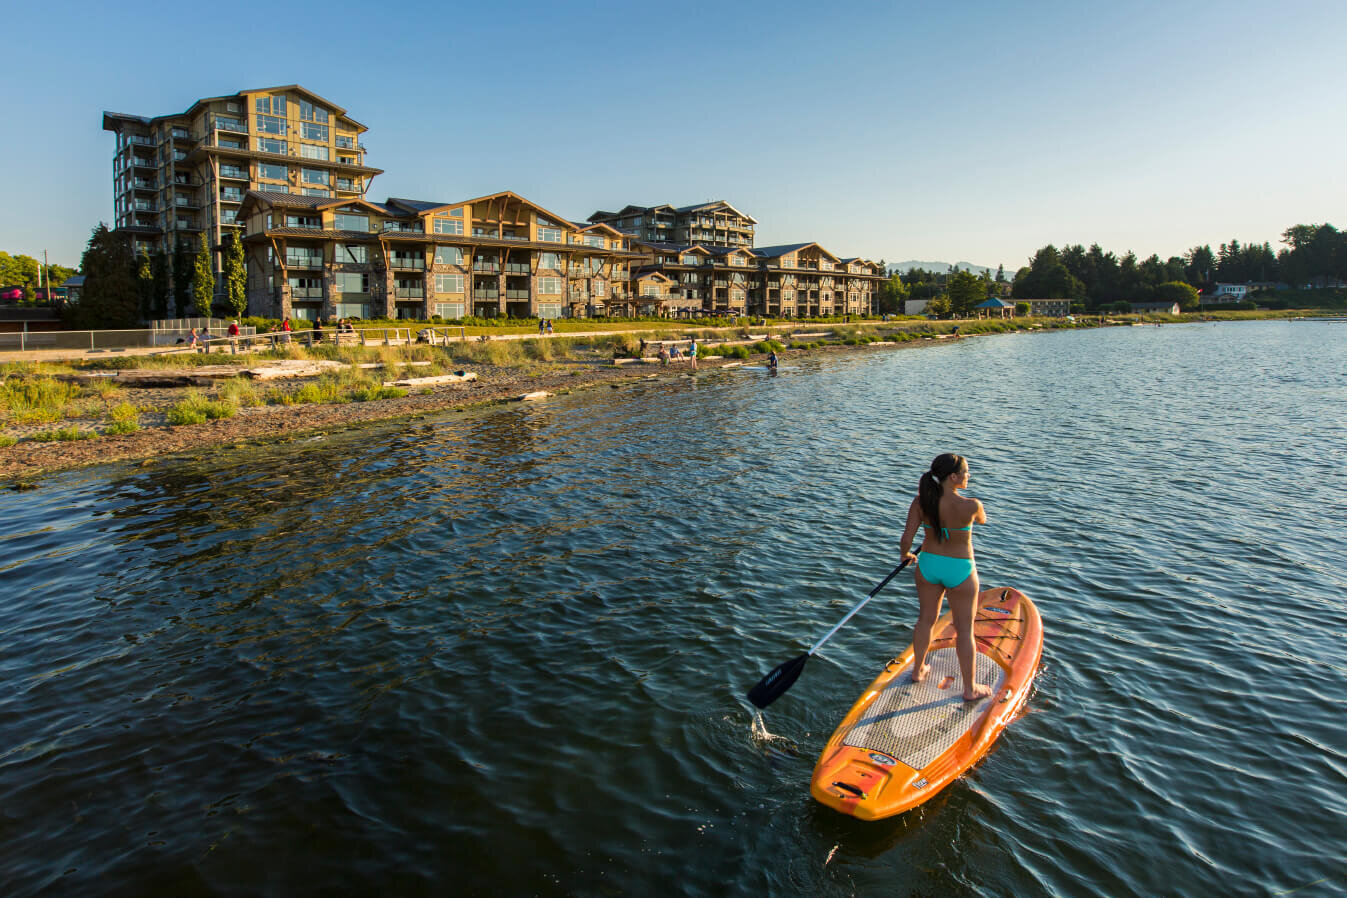   SUP Rentals    View All Stay ® | Well Amenities  